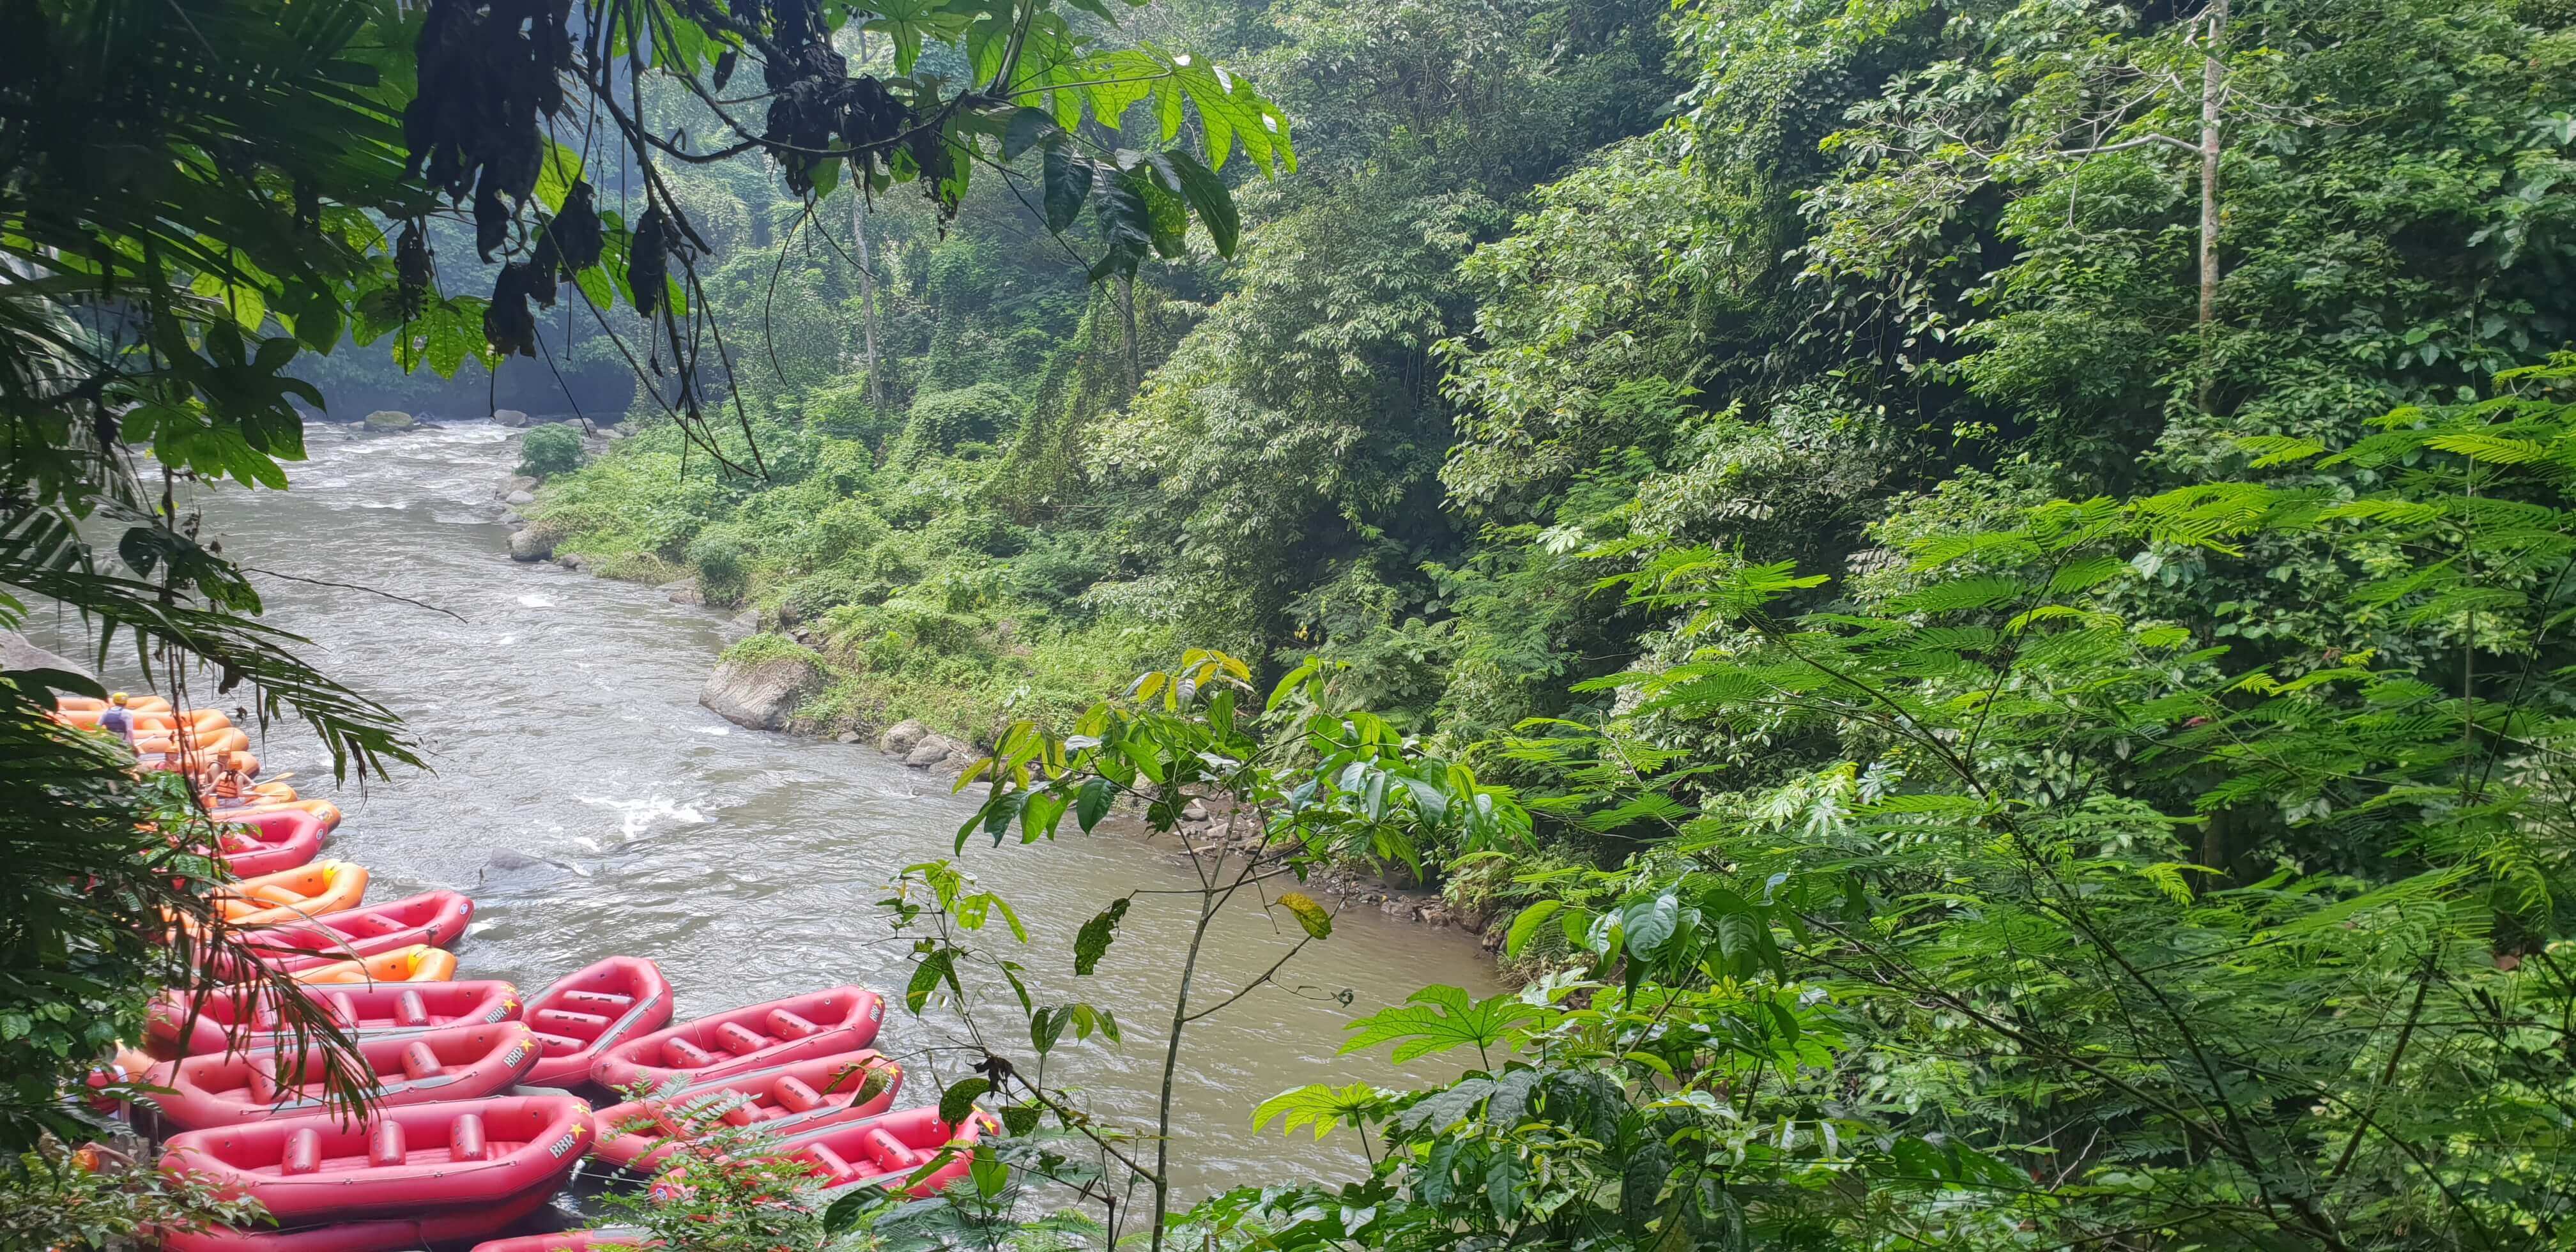 You reach the river rafting point after quite a bit of a hike through the forests and rice paddies